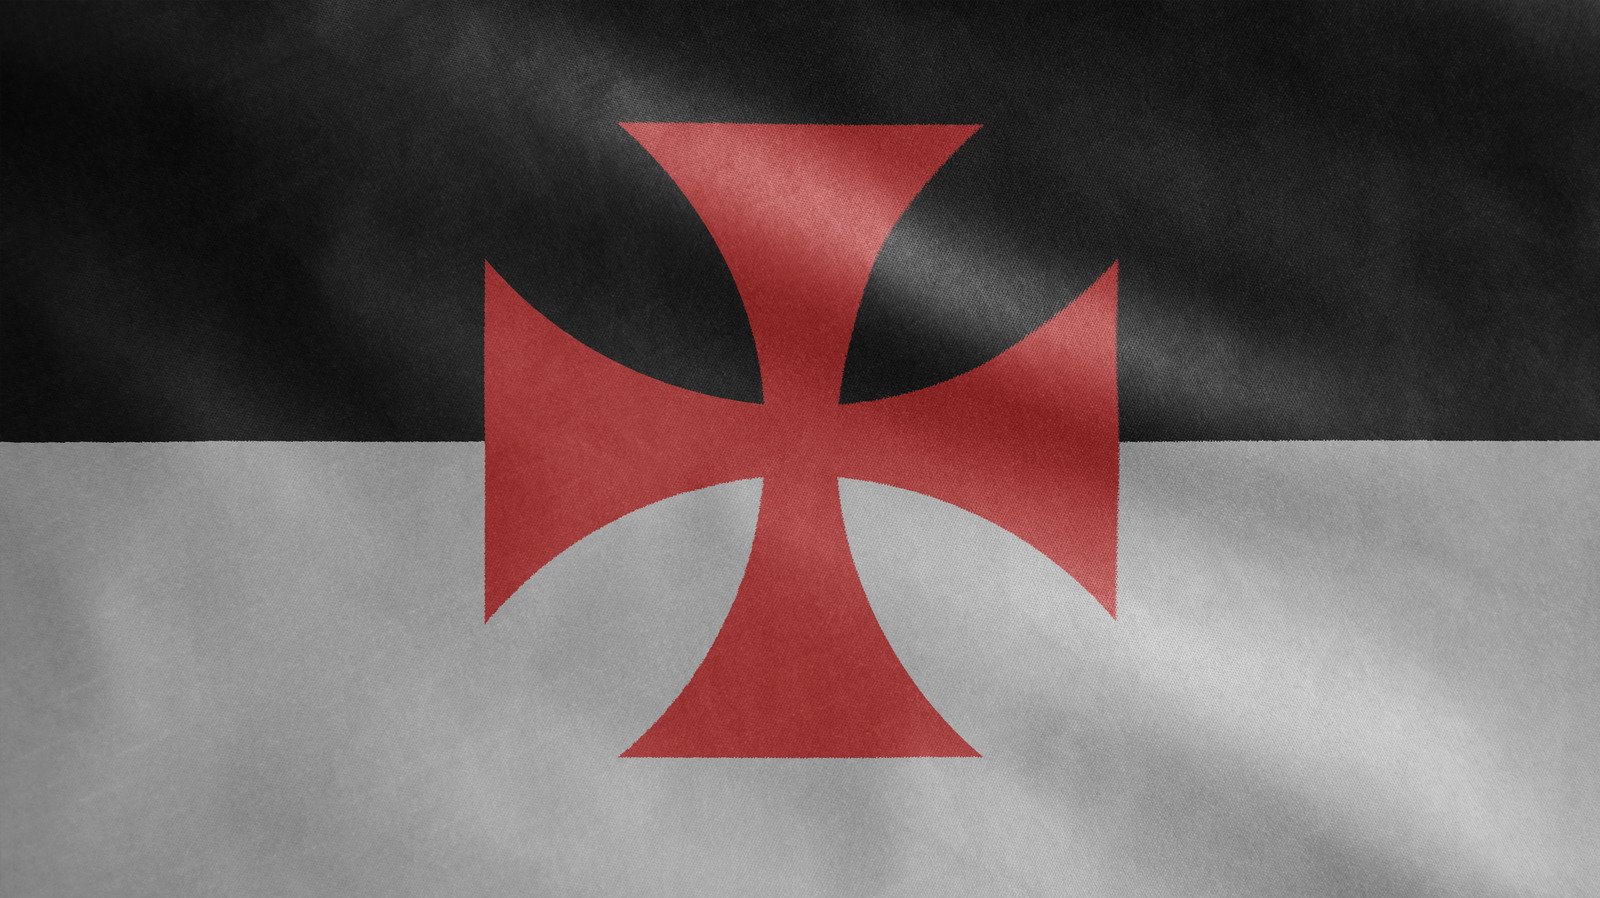 This Was The Dress Code Of The Knights Templar